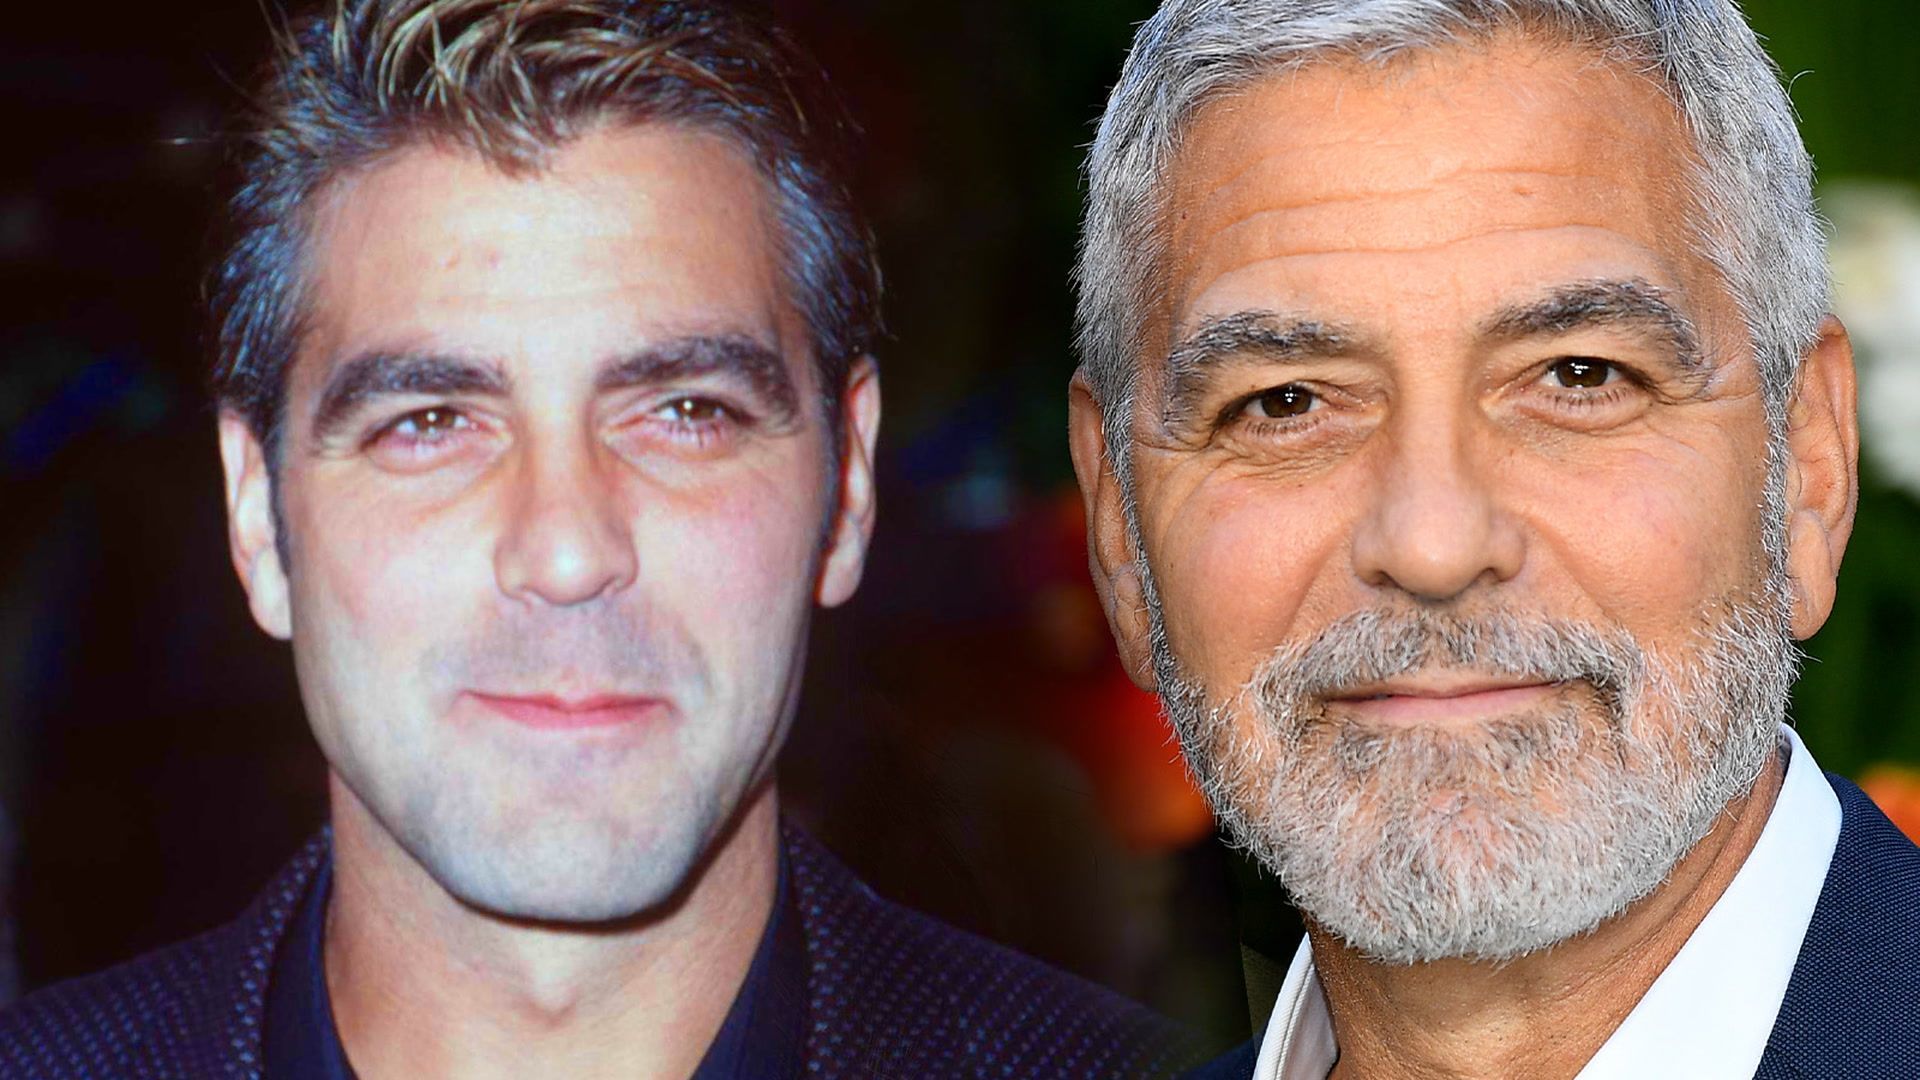 George Clooney at over 60: The actor is getting hotter